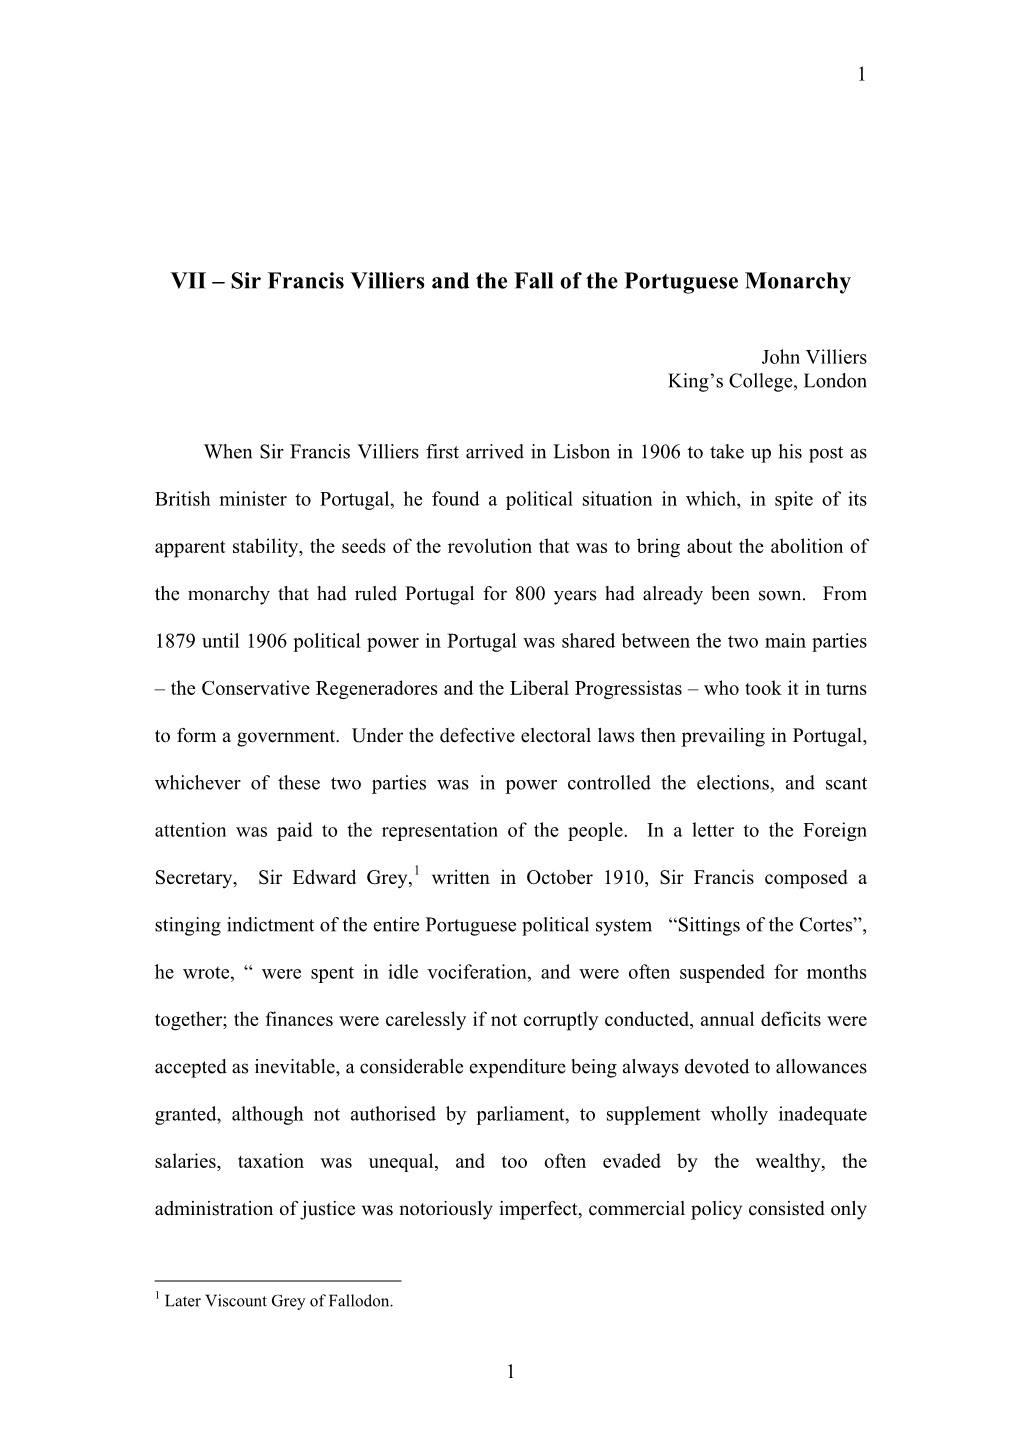 Sir Francis Villiers and the Fall of the Portuguese Monarchy